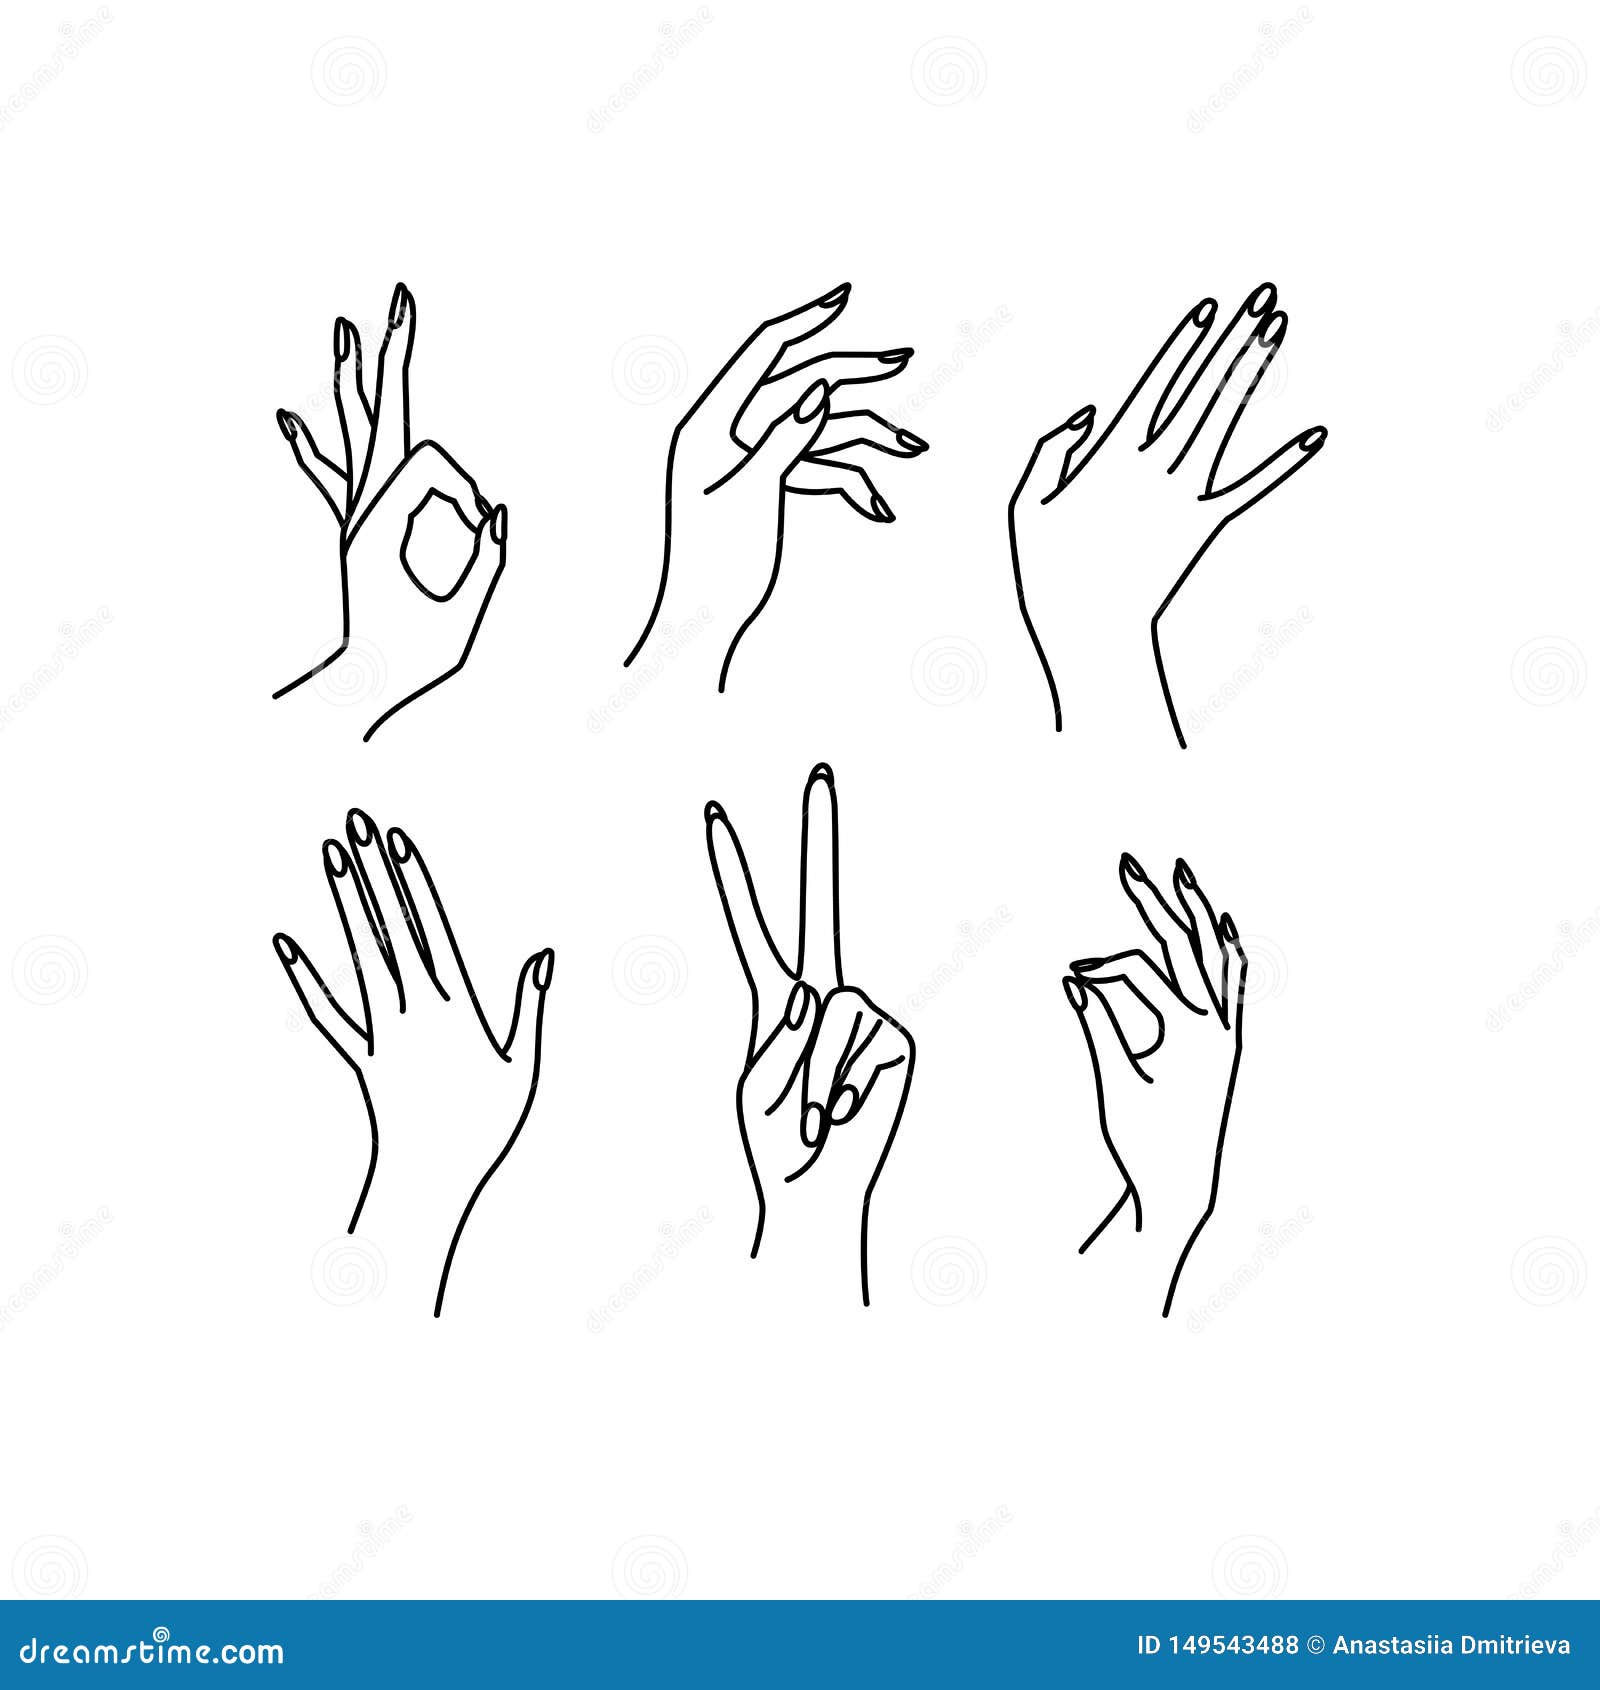 different hand gestures, how to draw anime girl, black and white